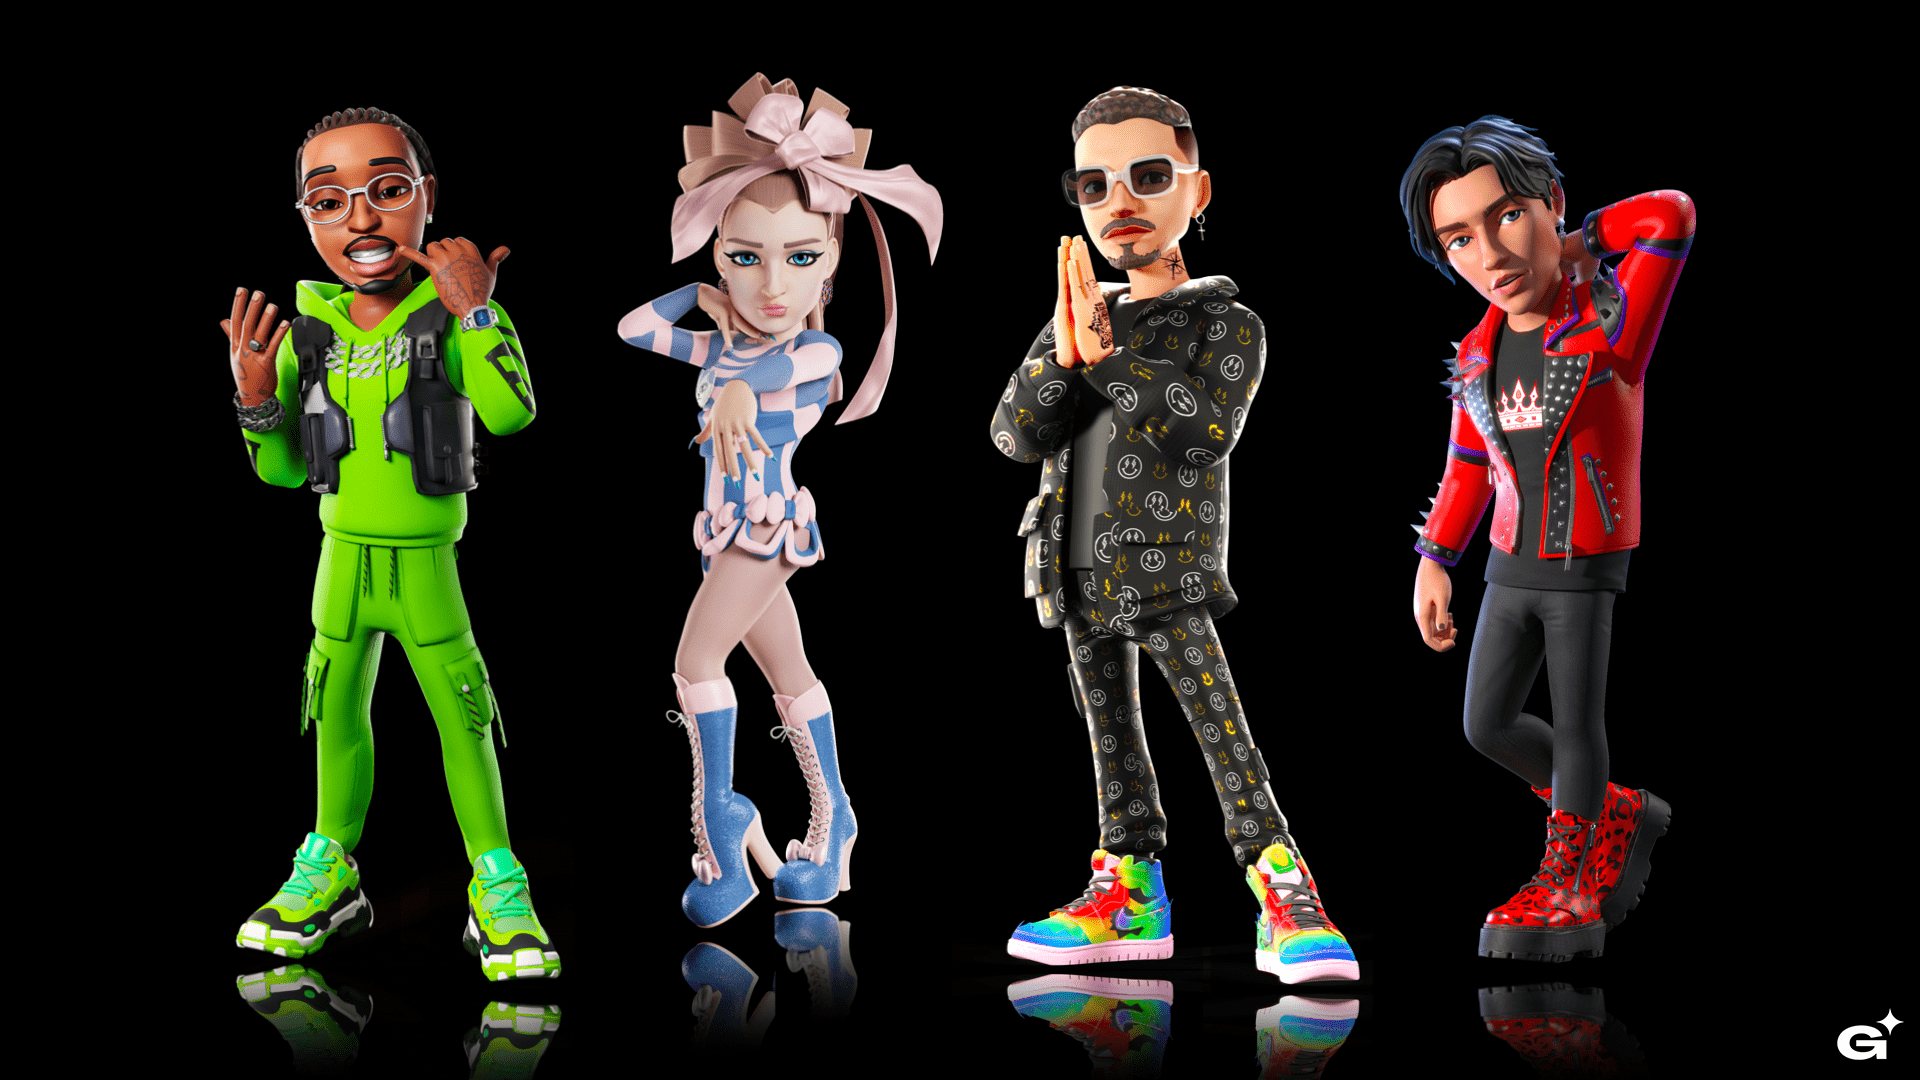 Universal Music Group teams up with virtual avatar company, Genies